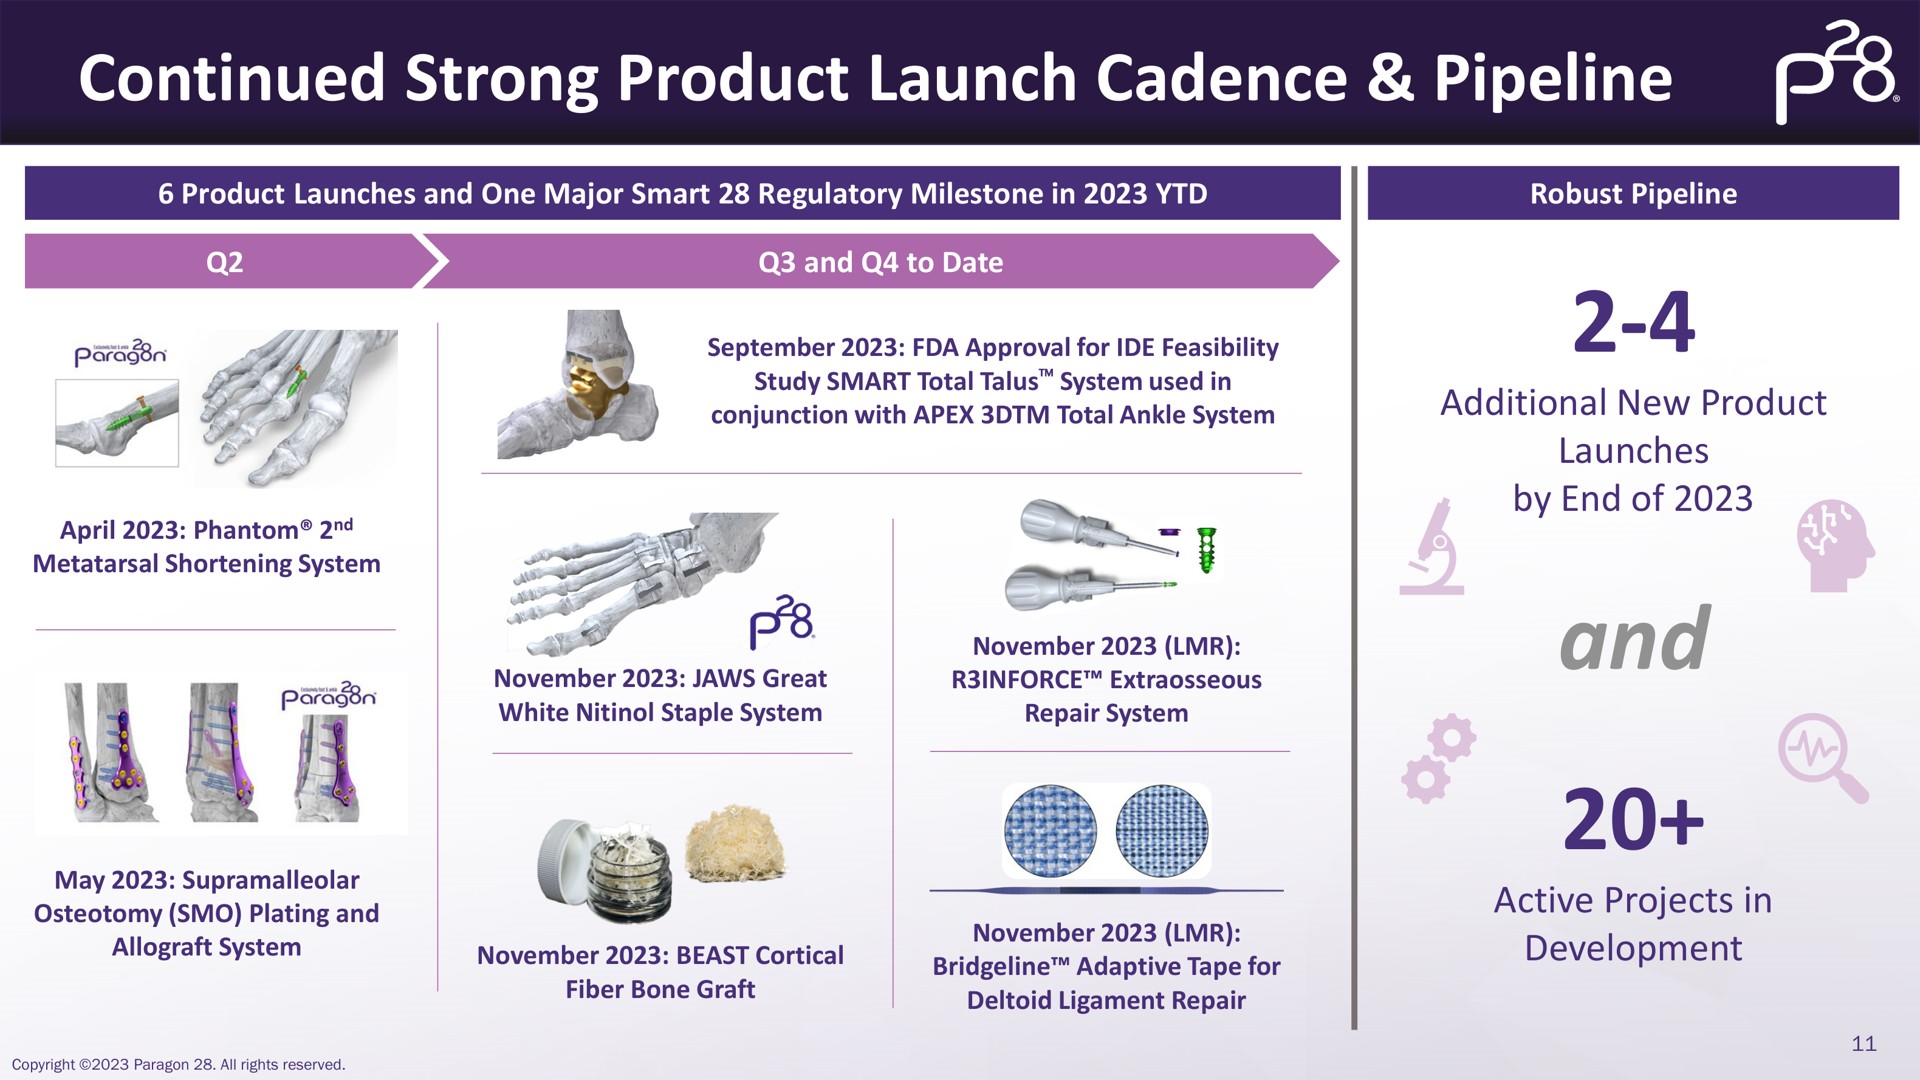 continued strong product launch cadence pipeline additional new product launches by end of and active projects in development | Paragon28